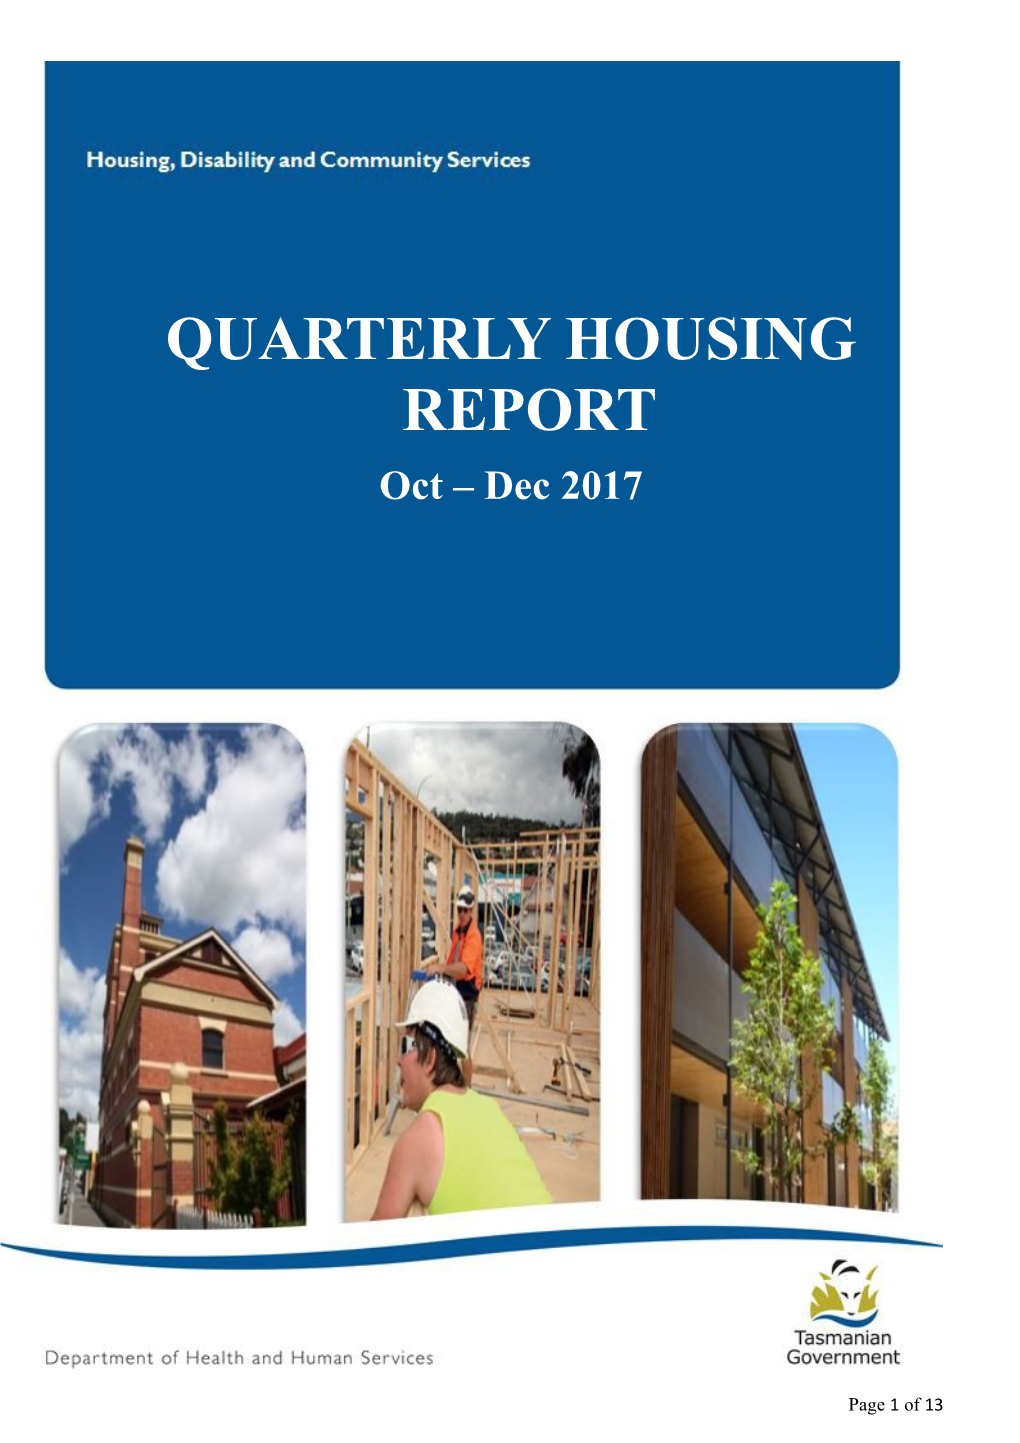 Housing, Disability and Community Services - Quarterly Housing Report, October to December 2017